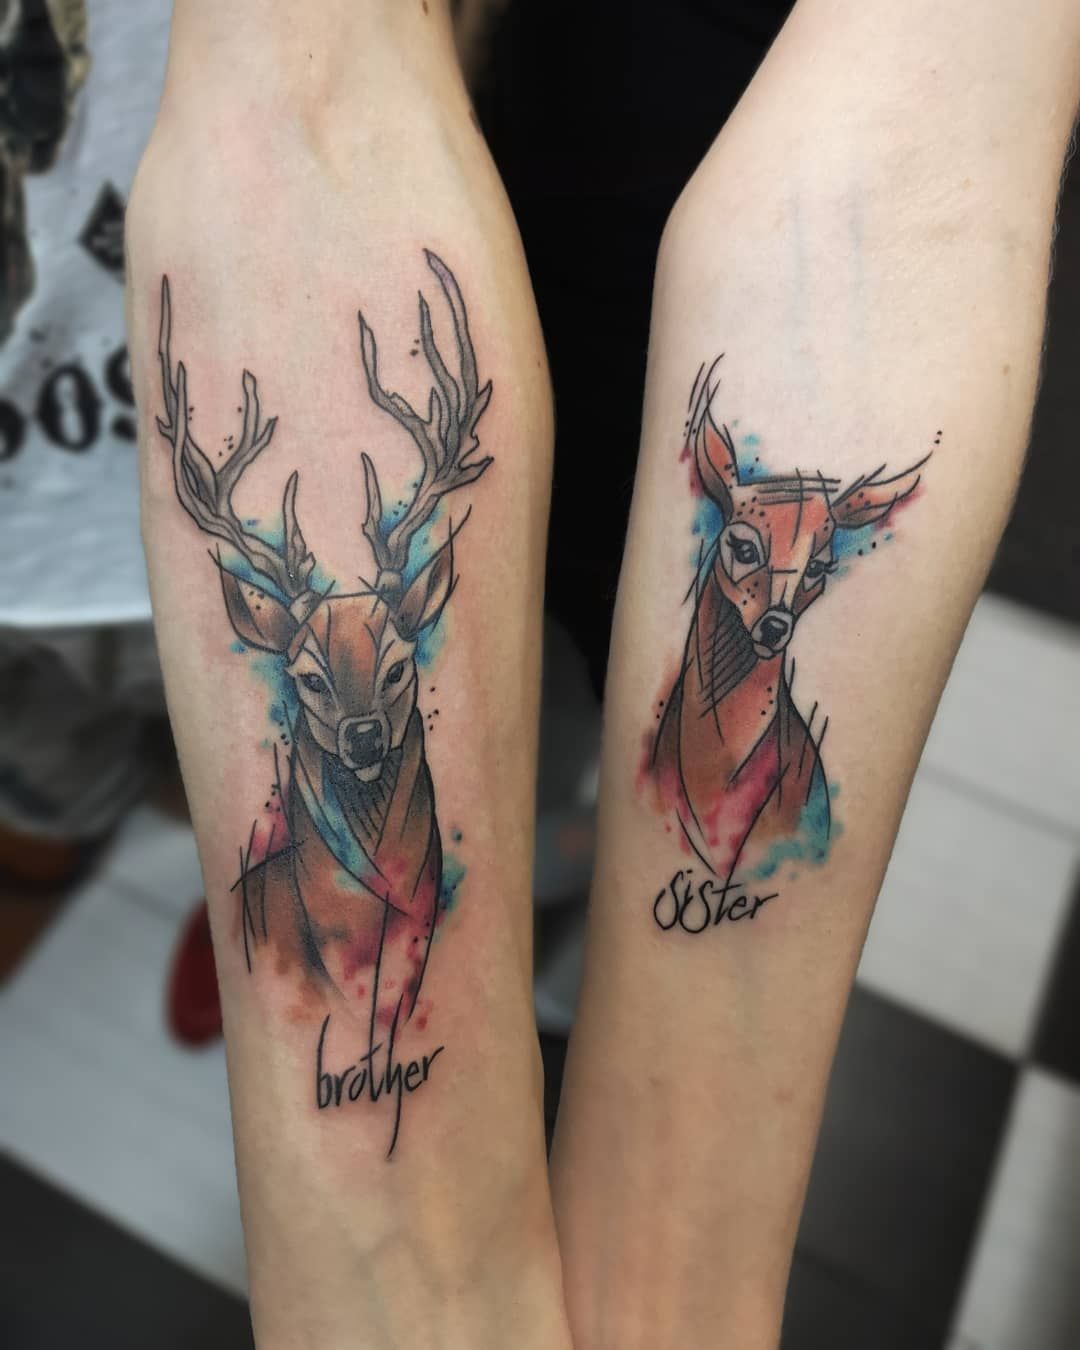 Cool Brother And Sister Tattoos (6)